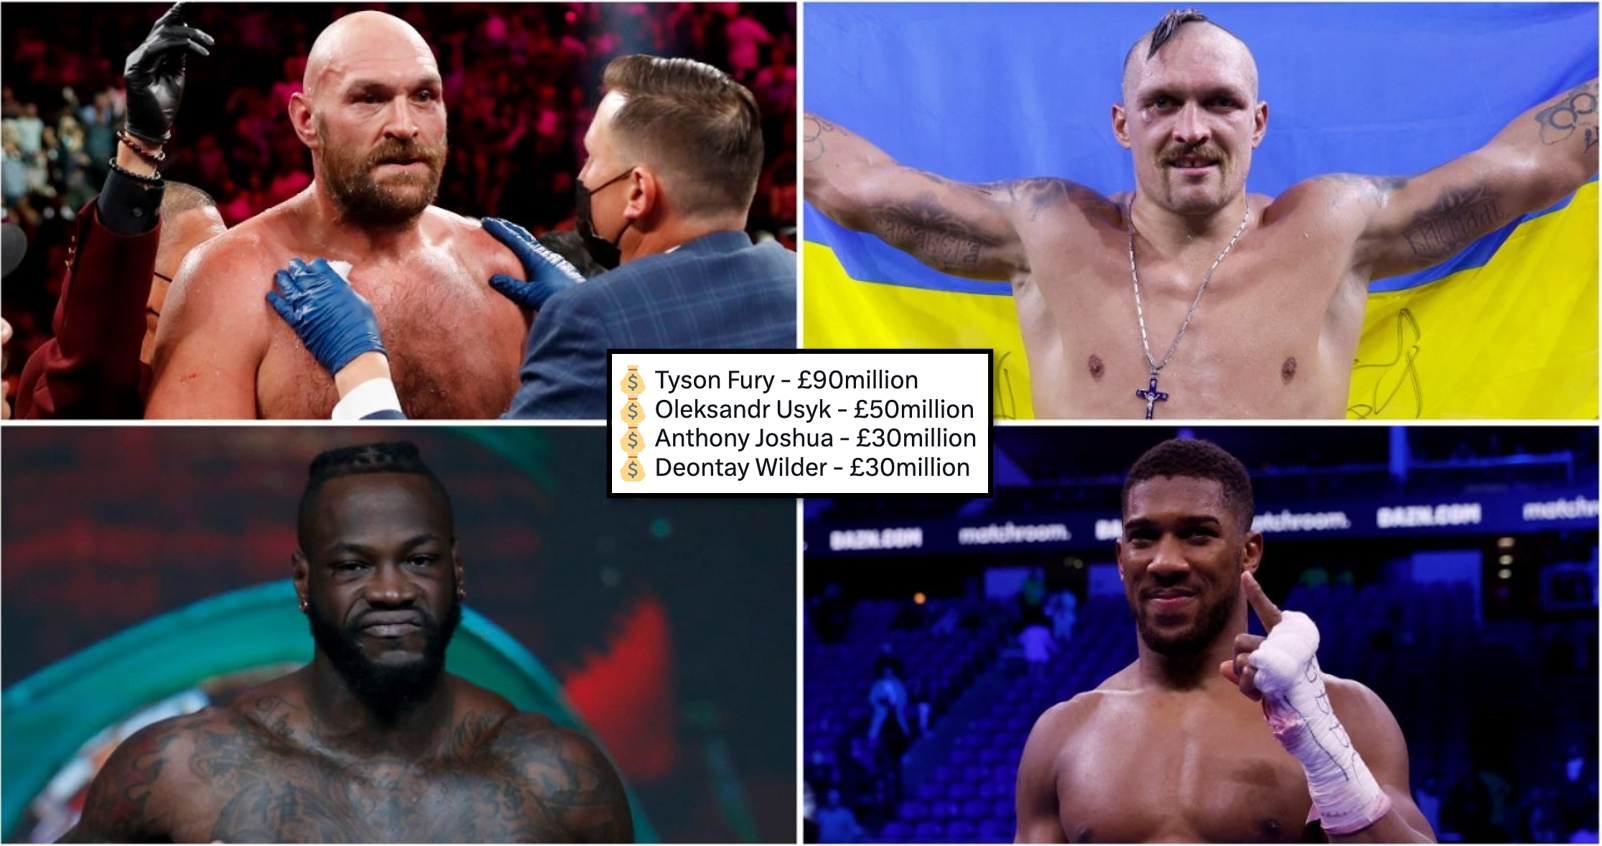 One of my toughest fights': Tyson Fury reacts to hard night vs Ngannou -  Bad Left Hook